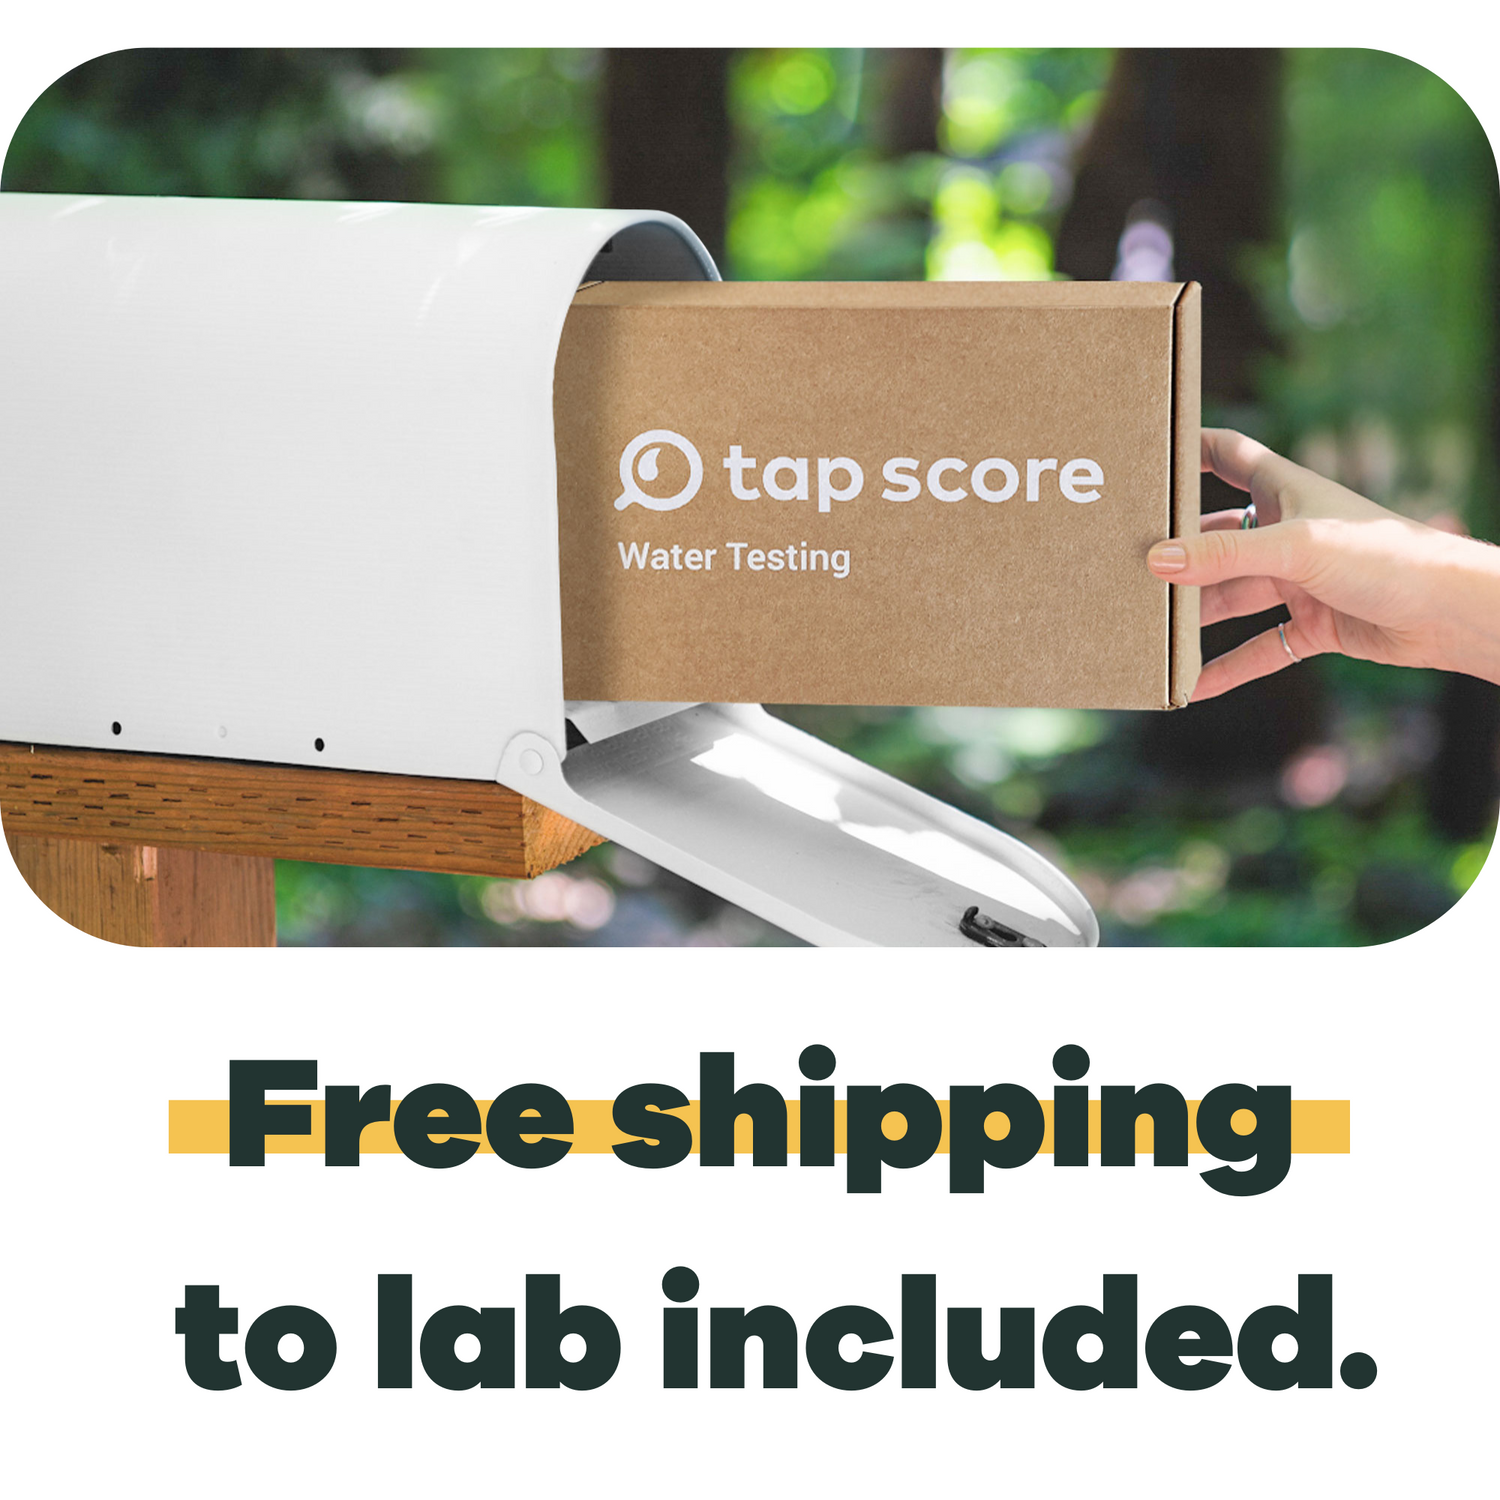 Easy shipping on all Tap Score Kits